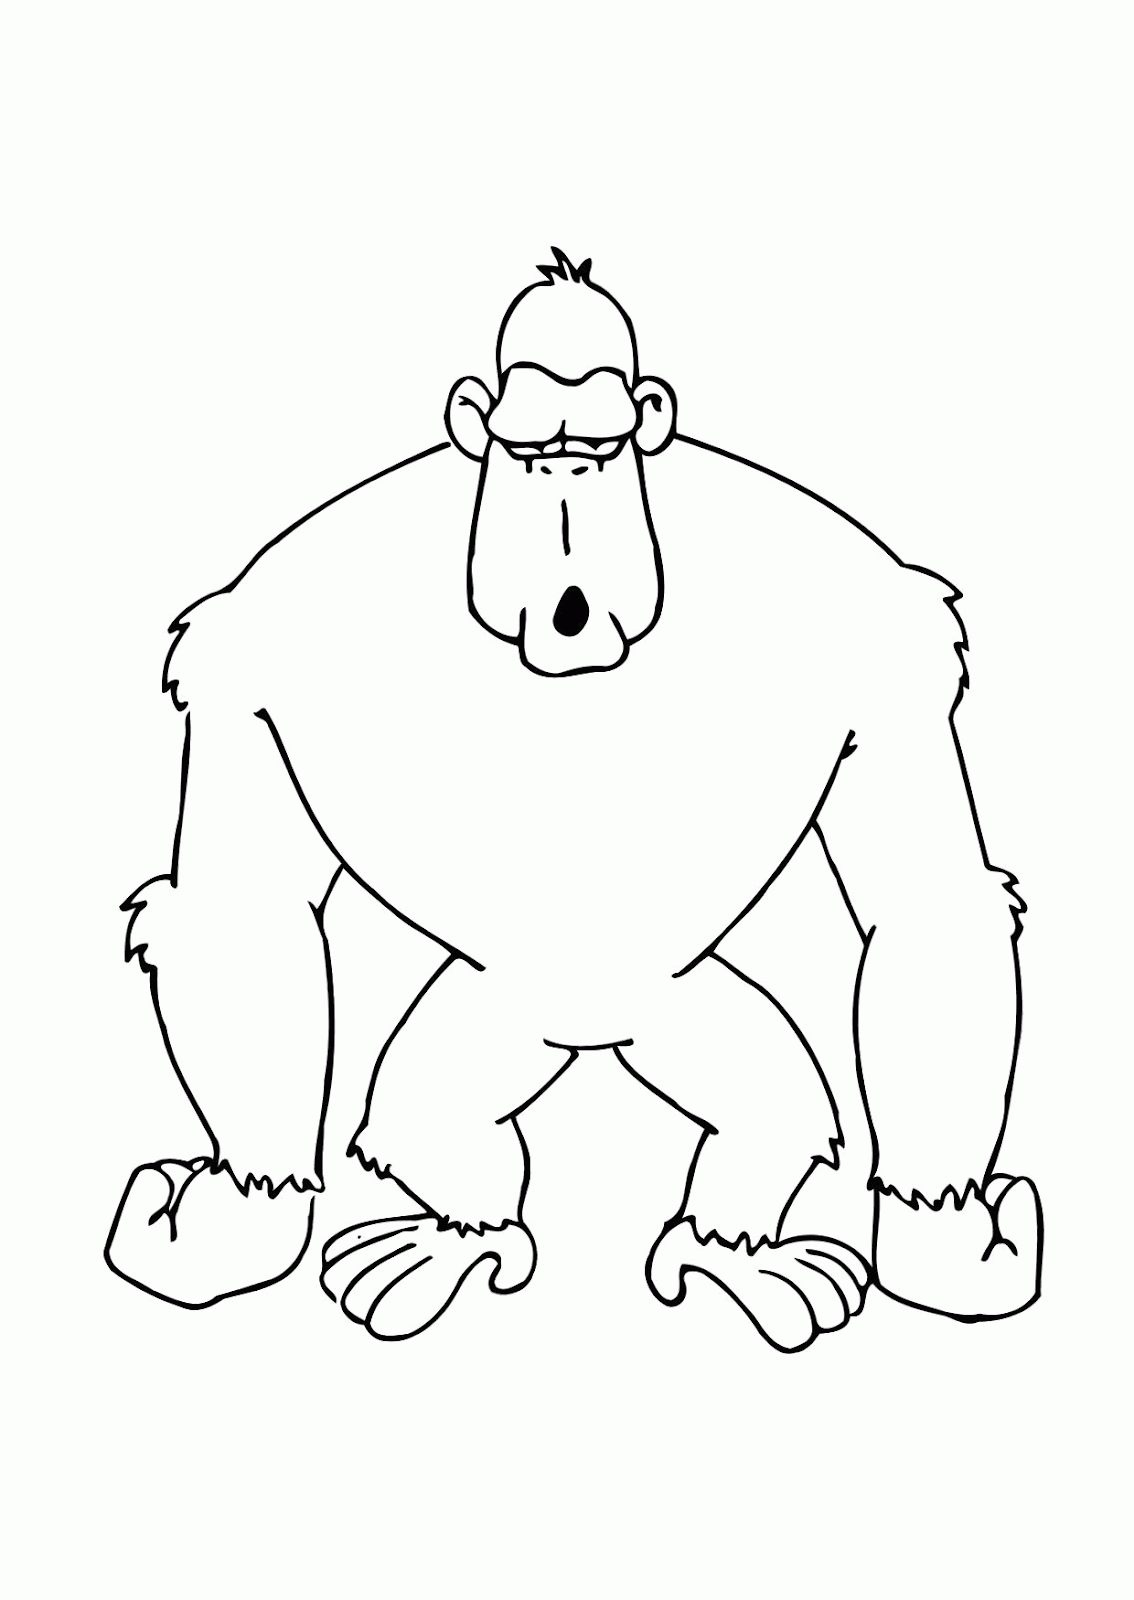 How to Draw a Gorilla for Kids, Easy Way to Draw a Gorilla Step by Step -  YouTube